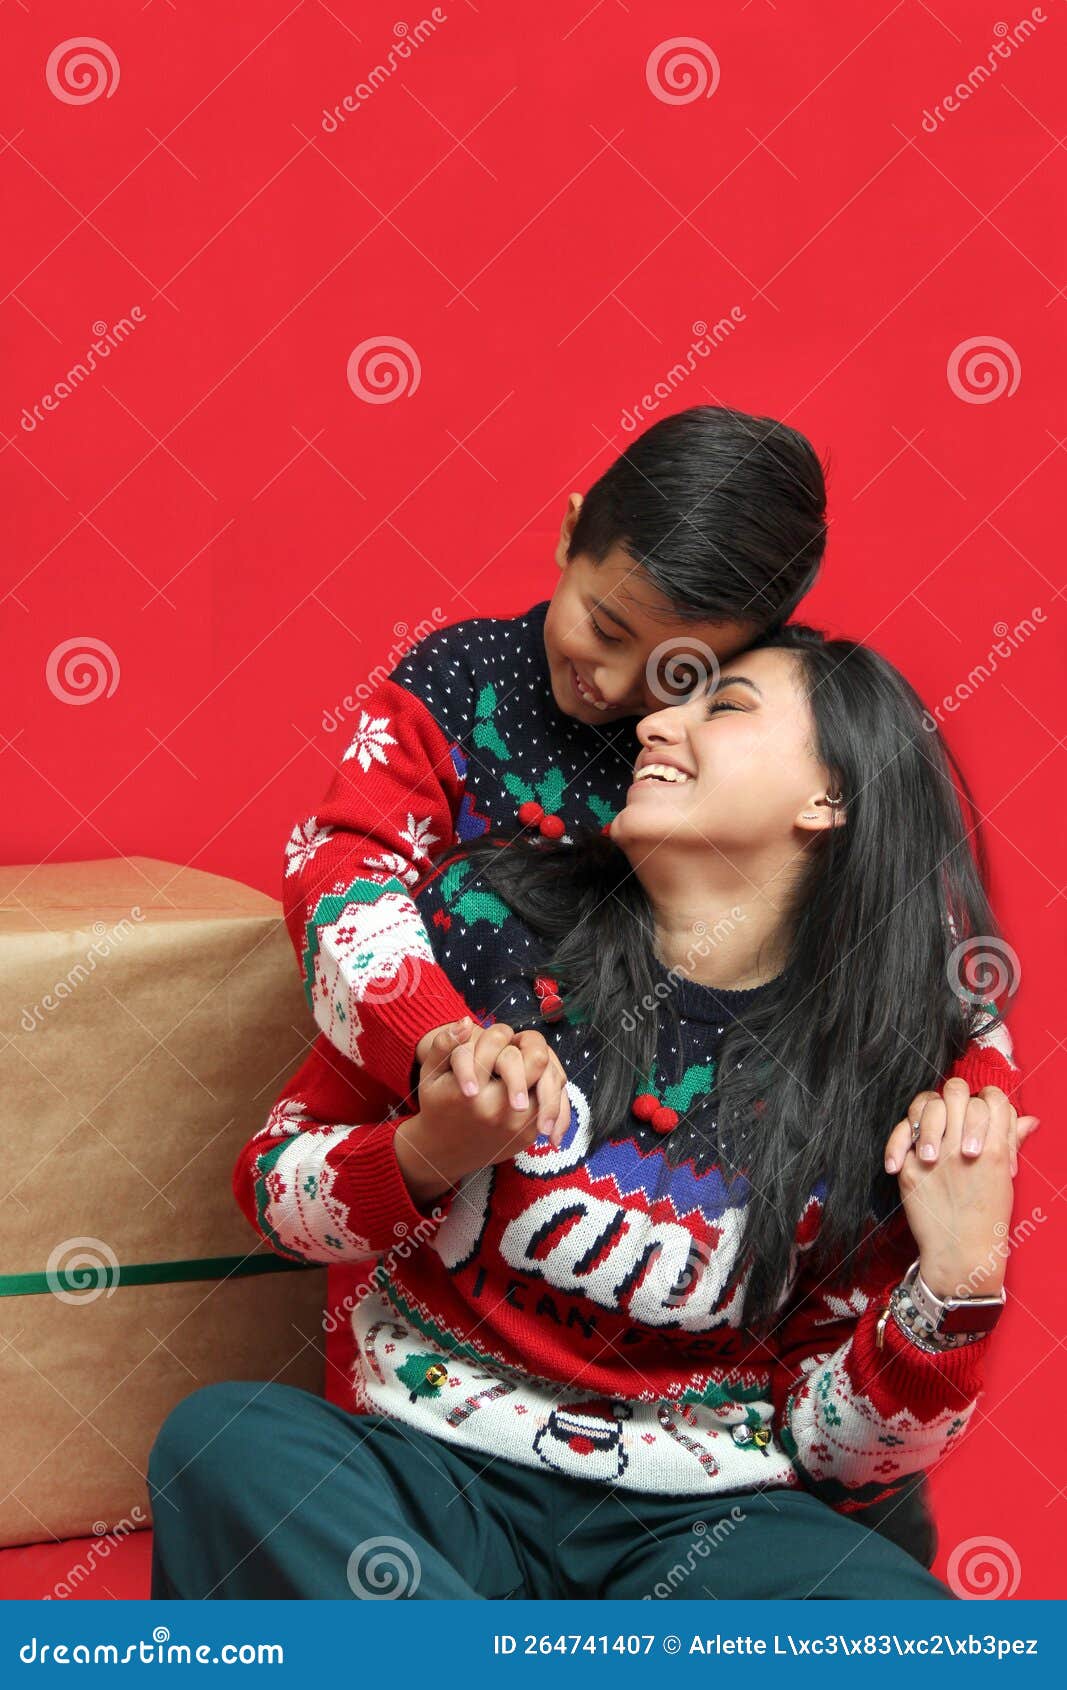 Latina Mom And Son Wear Ugly Christmas Sweaters And Show Their Love To Each Other On A Red